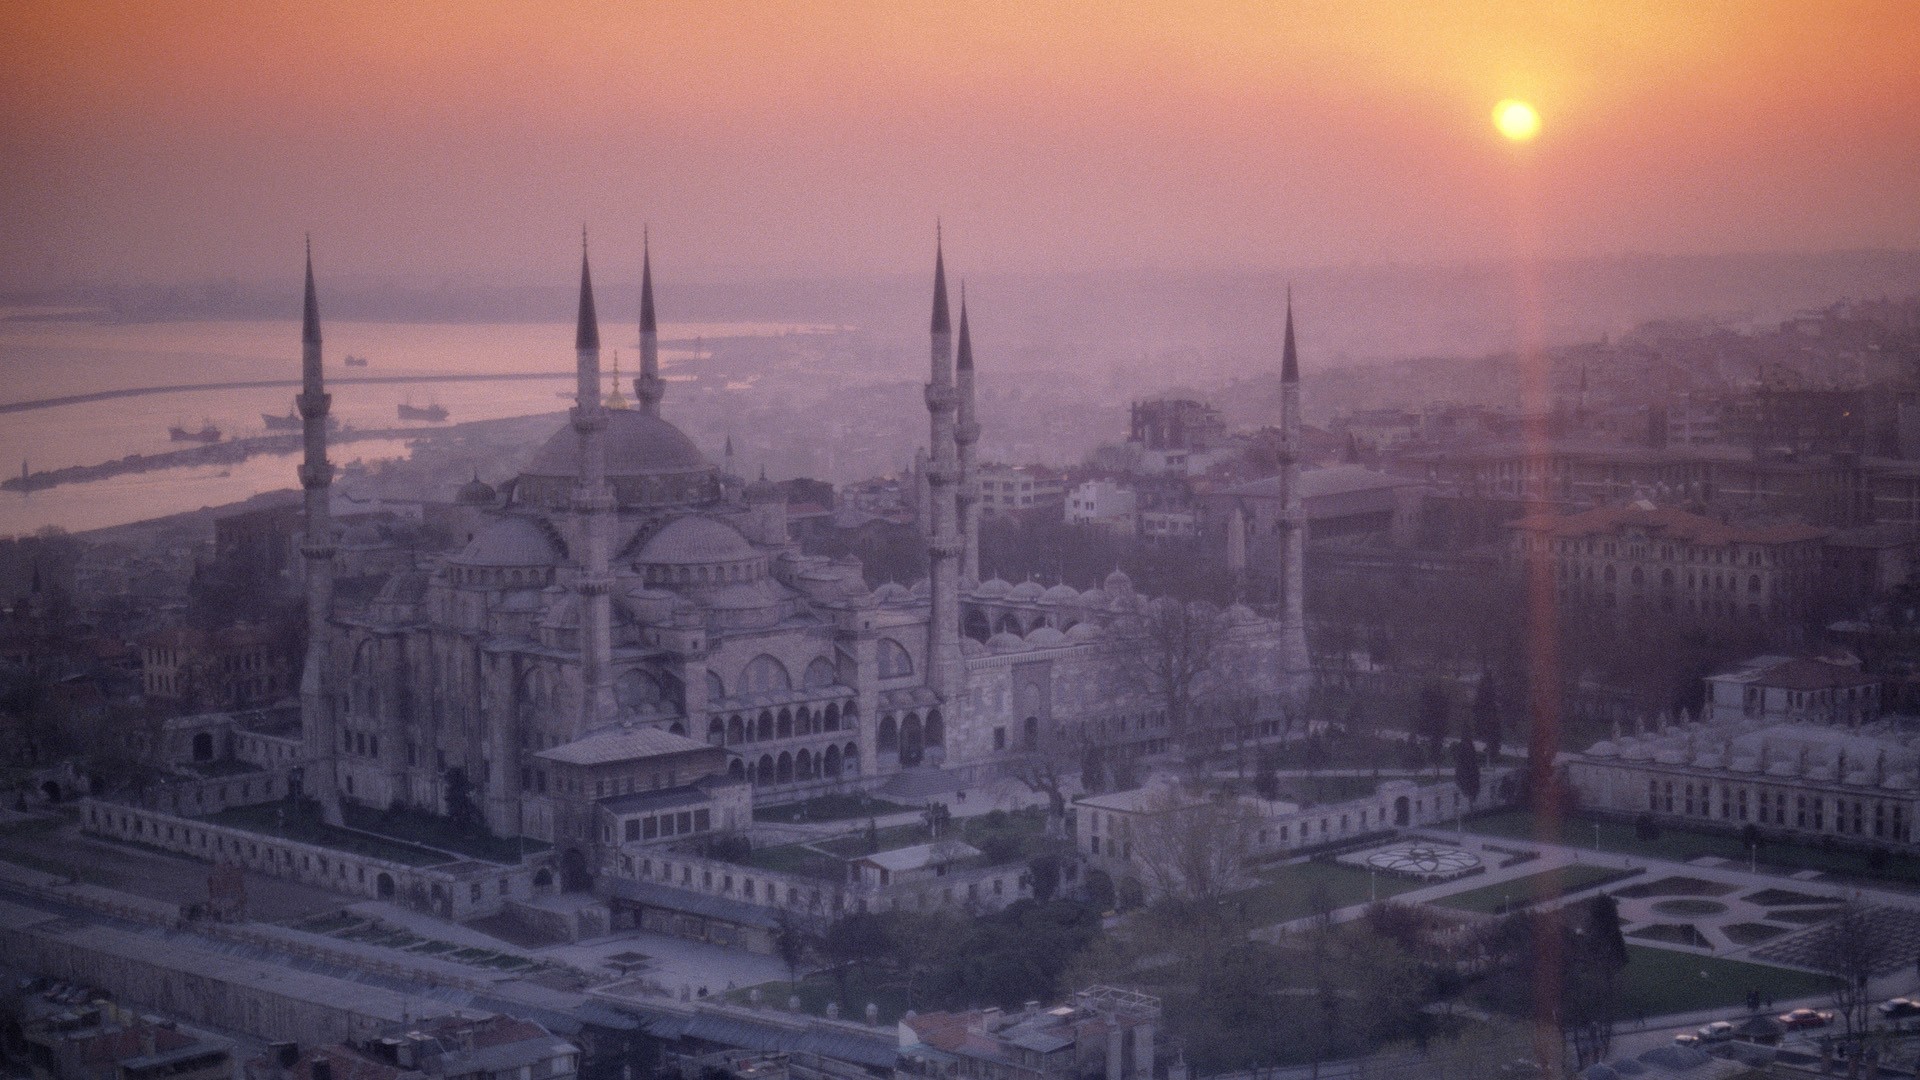 Blue Mosque At Sunset Istanbul Turkey Full HD Wallpaper